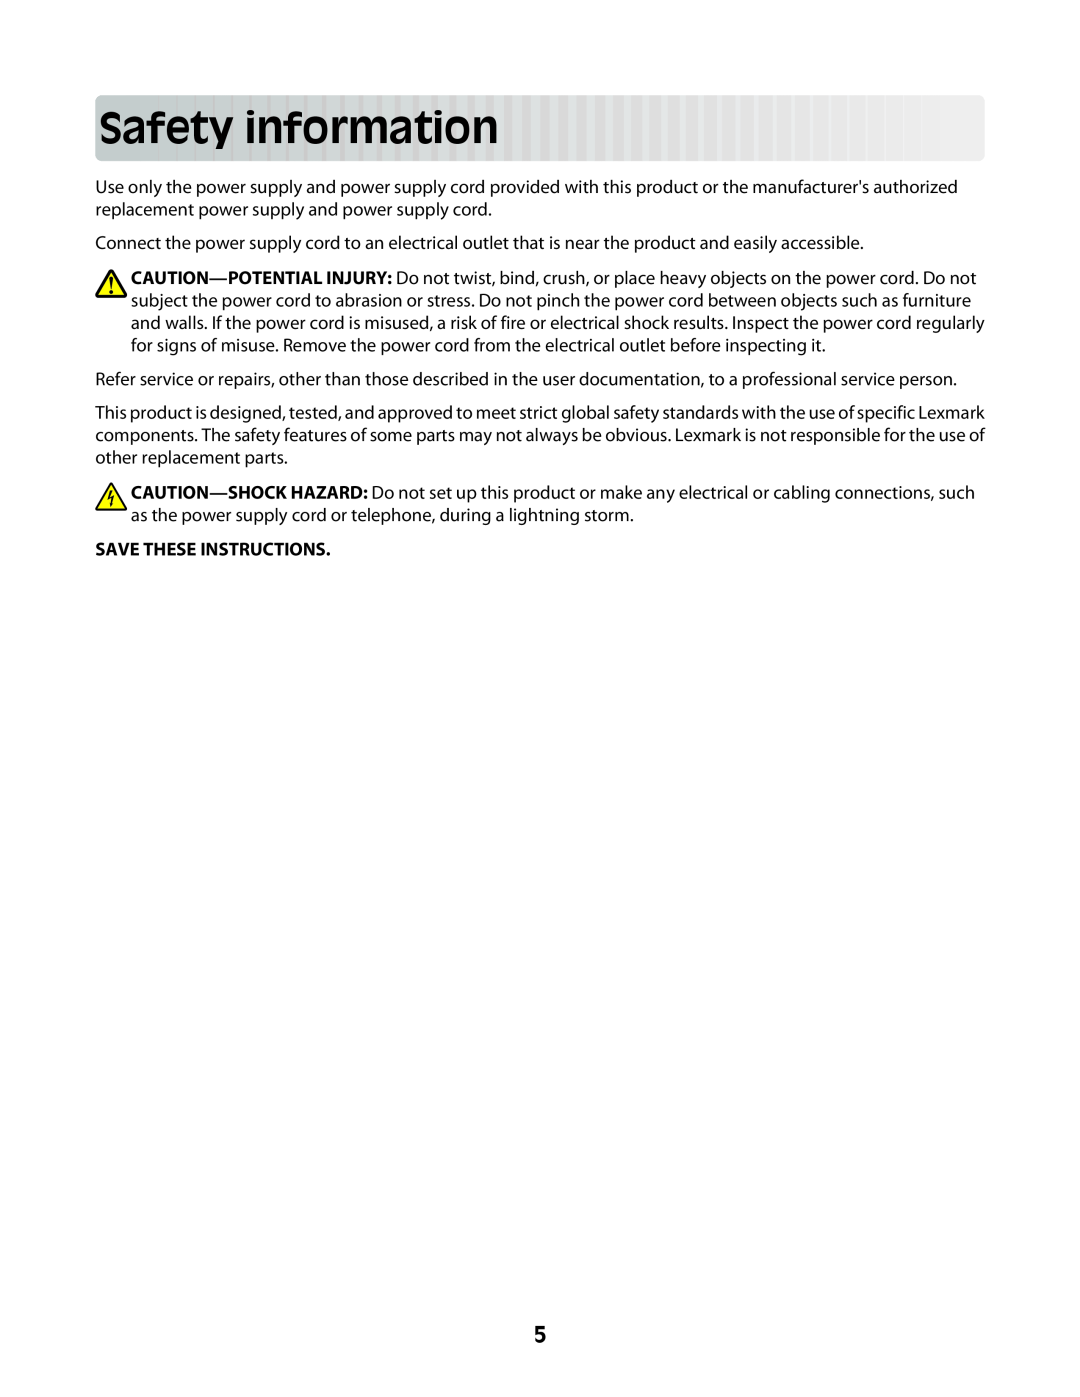 Lexmark Z2300 manual Safetyinformation, Save These Instructions 